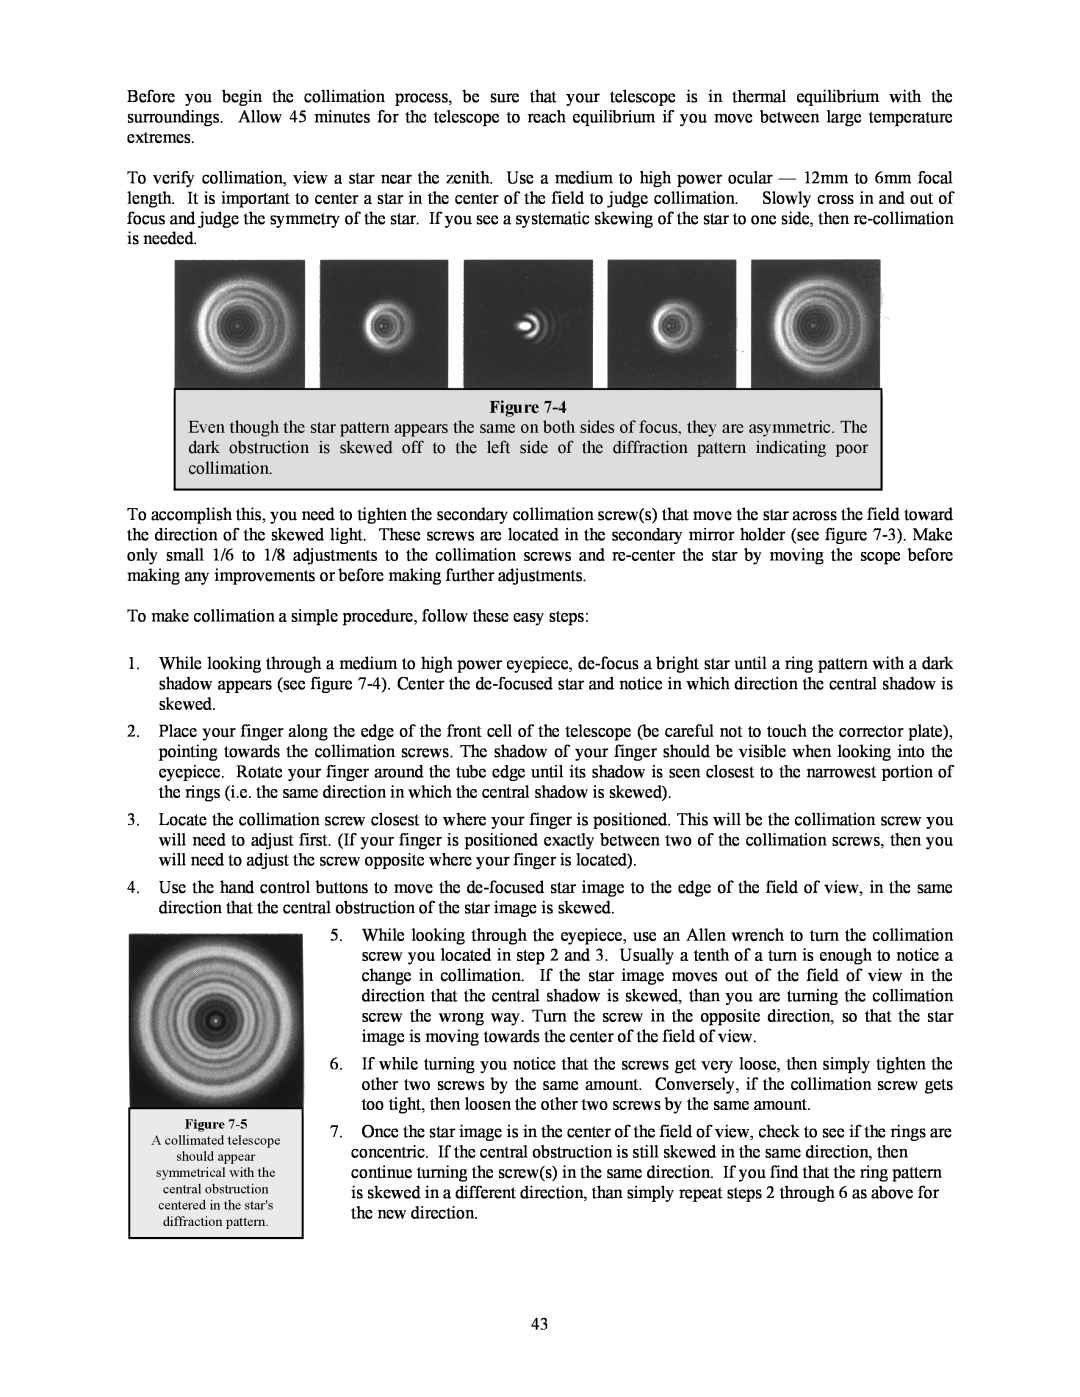 Celestron OMNI XLT 102 manual To make collimation a simple procedure, follow these easy steps 